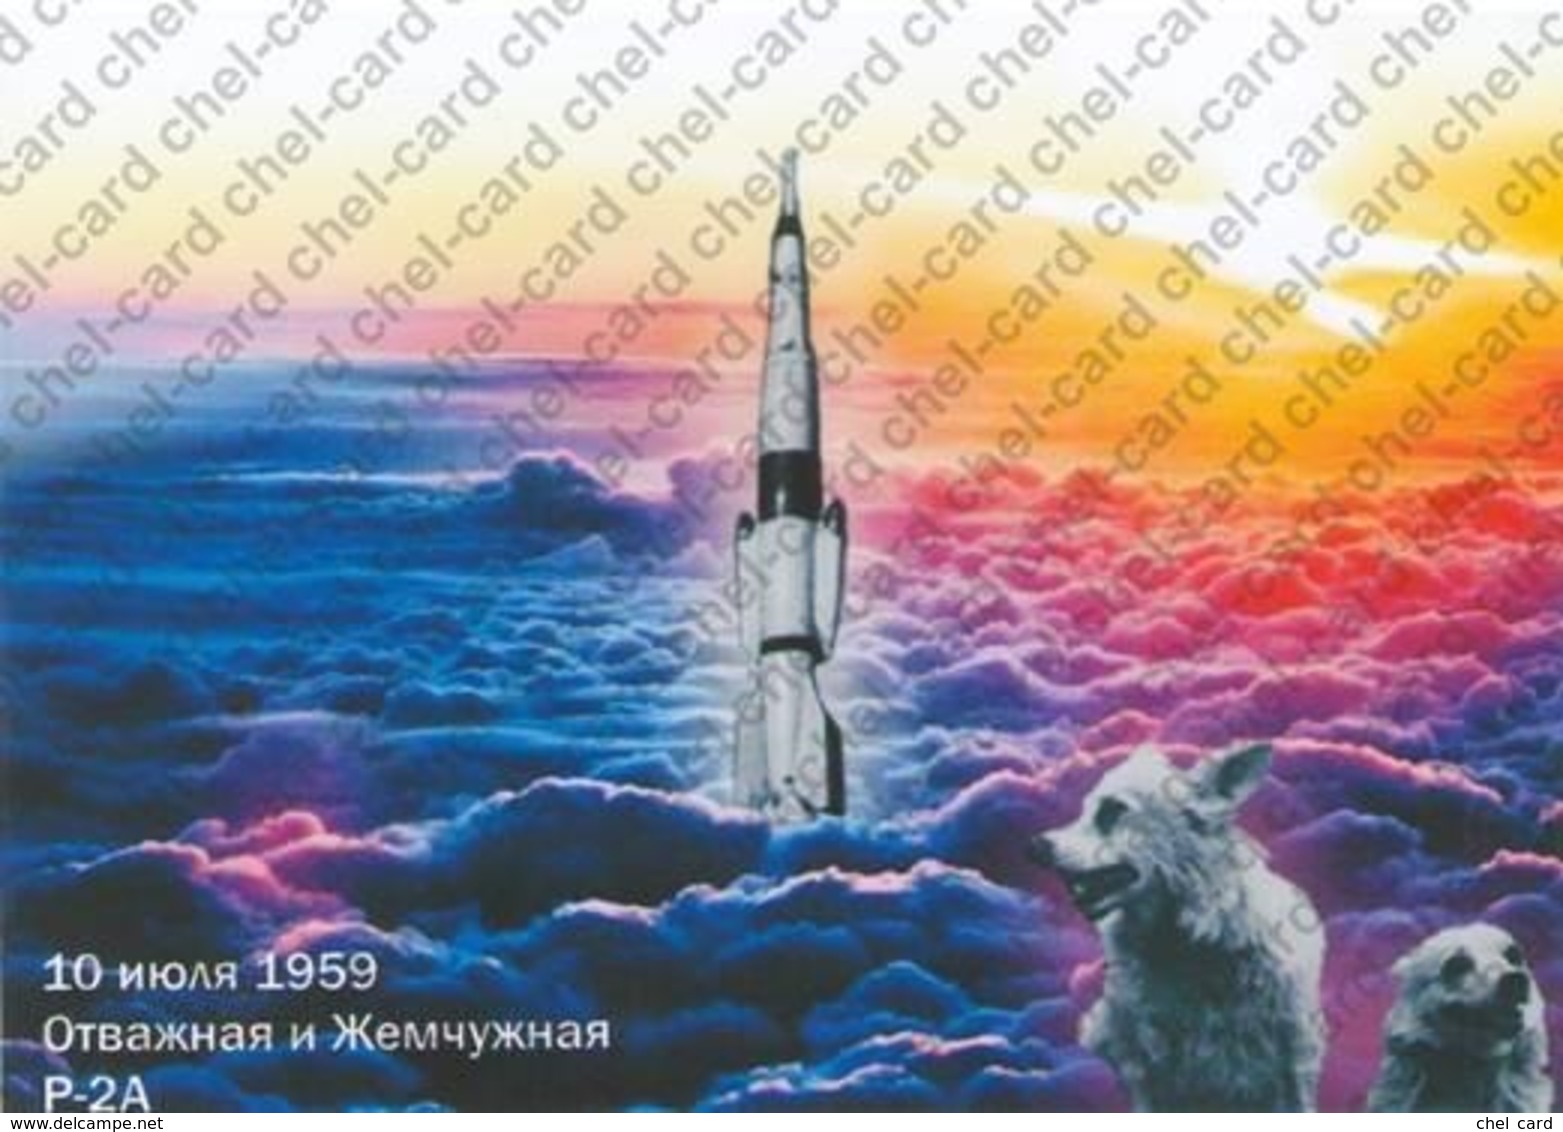 [2018, Space, Dogs, Rockets] Post Card "[Flight On A Geophysical Rocket Of Dogs] Brave And Pearl. July 10, 1959. P-2A." - Russia